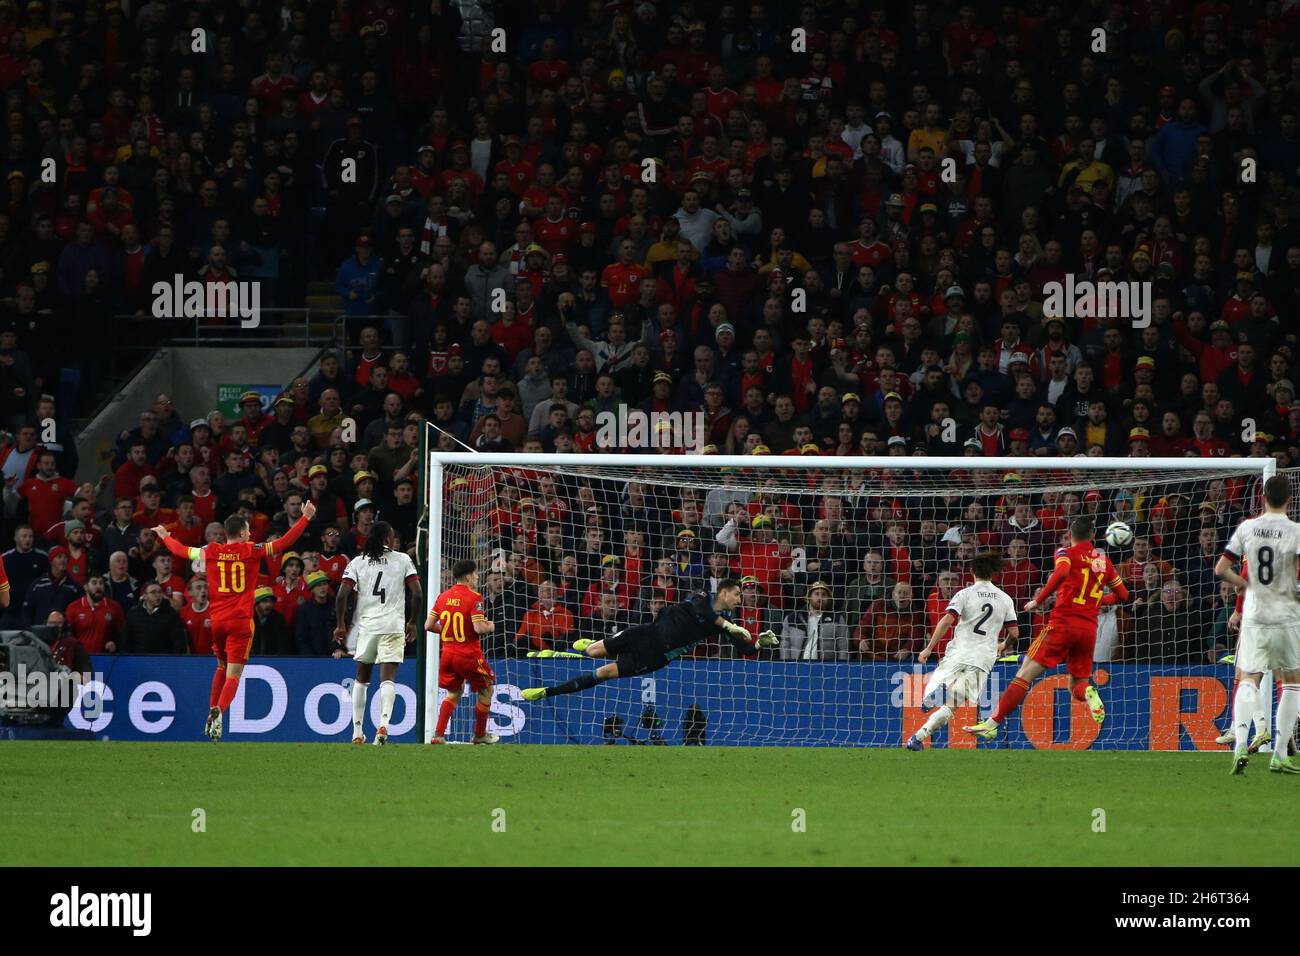 Cardiff, UK. 16th Nov, 2021. Belgium goalkeeper Koen Casteels watches as a shot goes just past his post. FIFA World Cup qualifier, group E, Wales v Belgium at the Cardiff city stadium in Cardiff, South Wales on Tuesday 16th November 2021. Editorial use only. pic by Andrew Orchard/Andrew Orchard sports photography/Alamy Live News Credit: Andrew Orchard sports photography/Alamy Live News Stock Photo